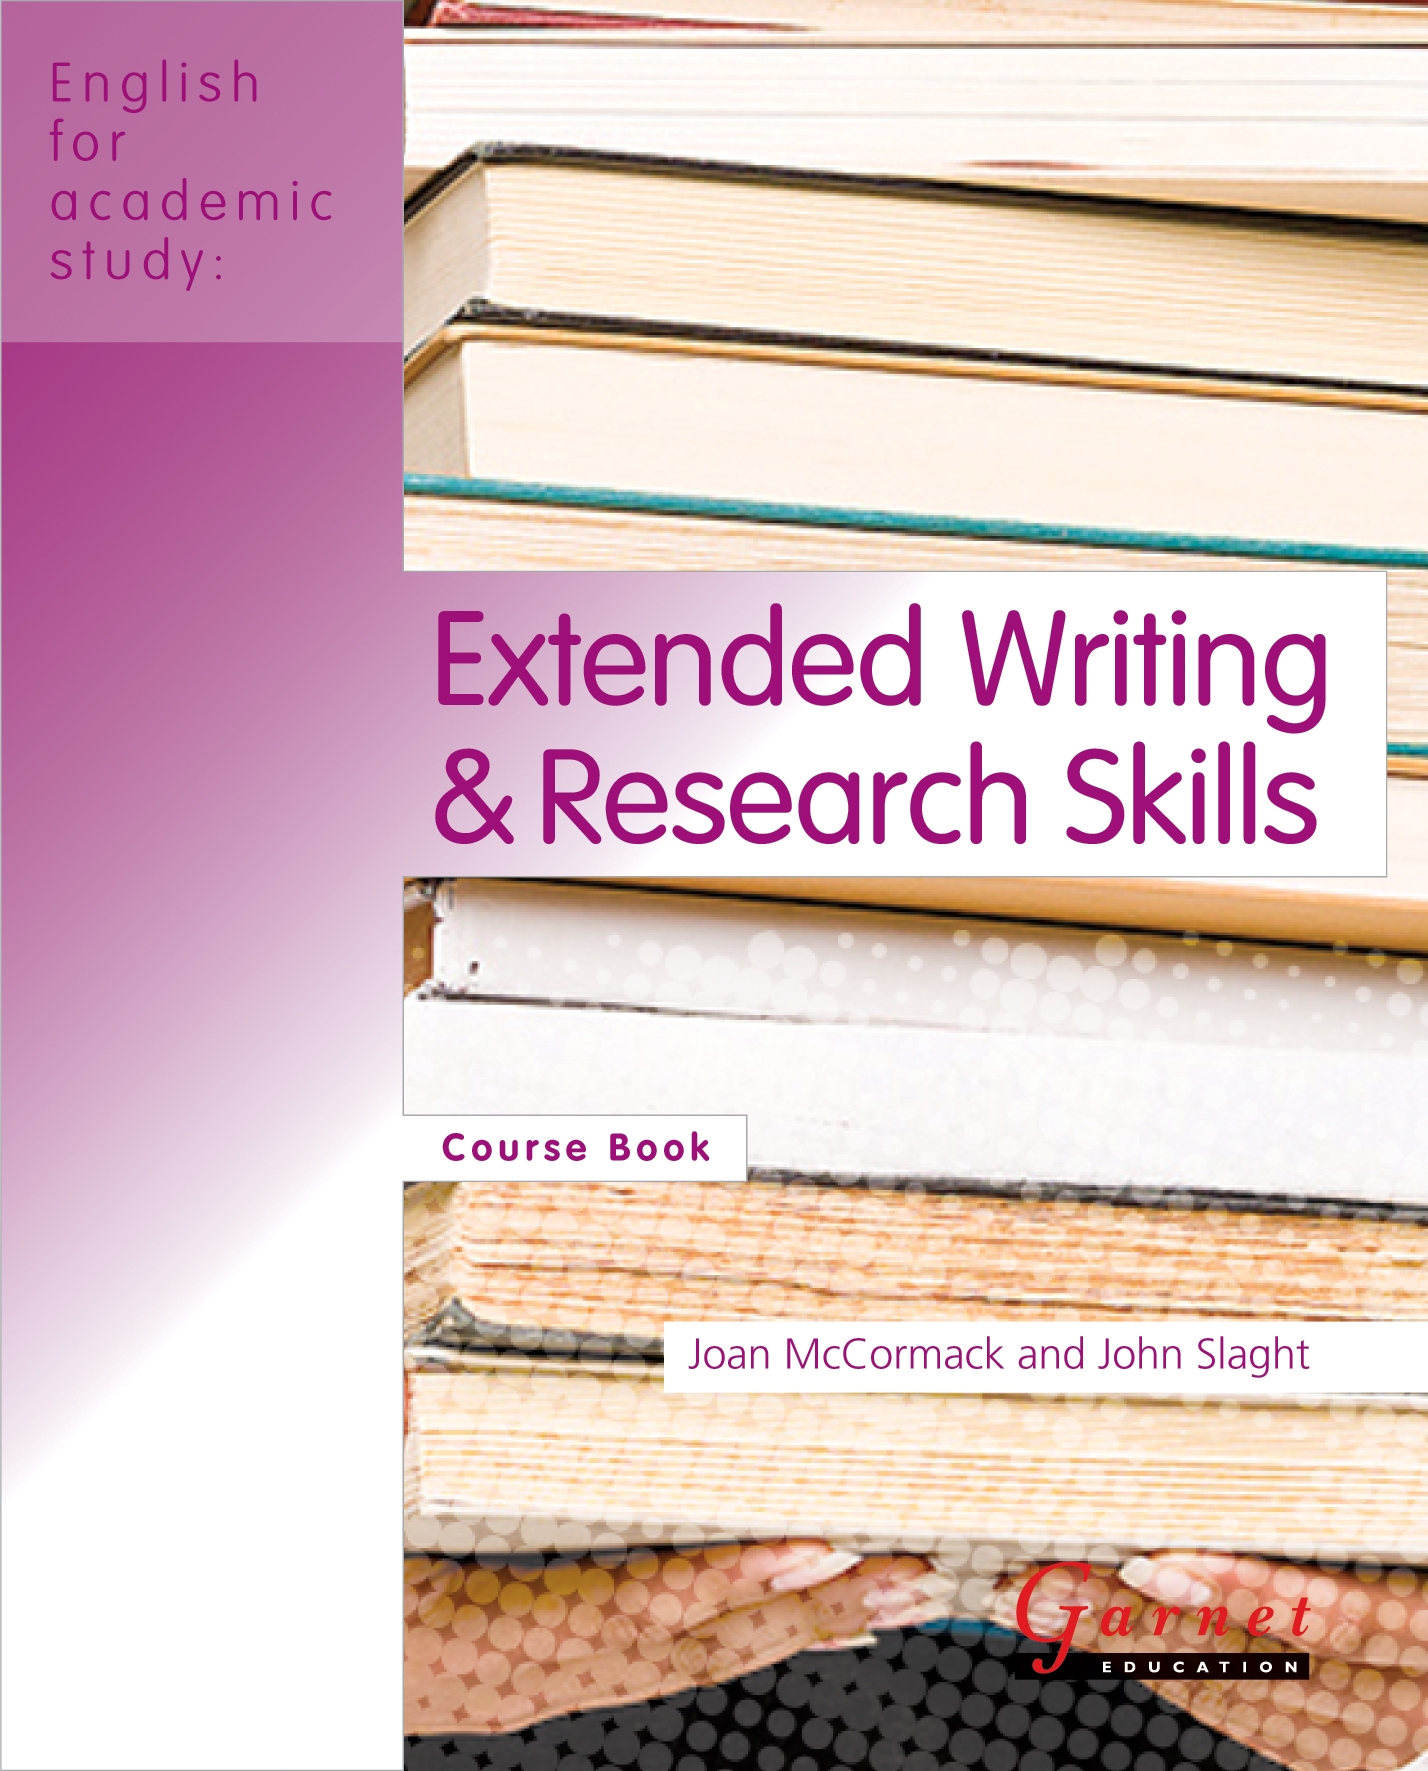 Academic English skills course book. Academic writing and research skills. Extended writing & research skills фото обложки. Книги английских издательств